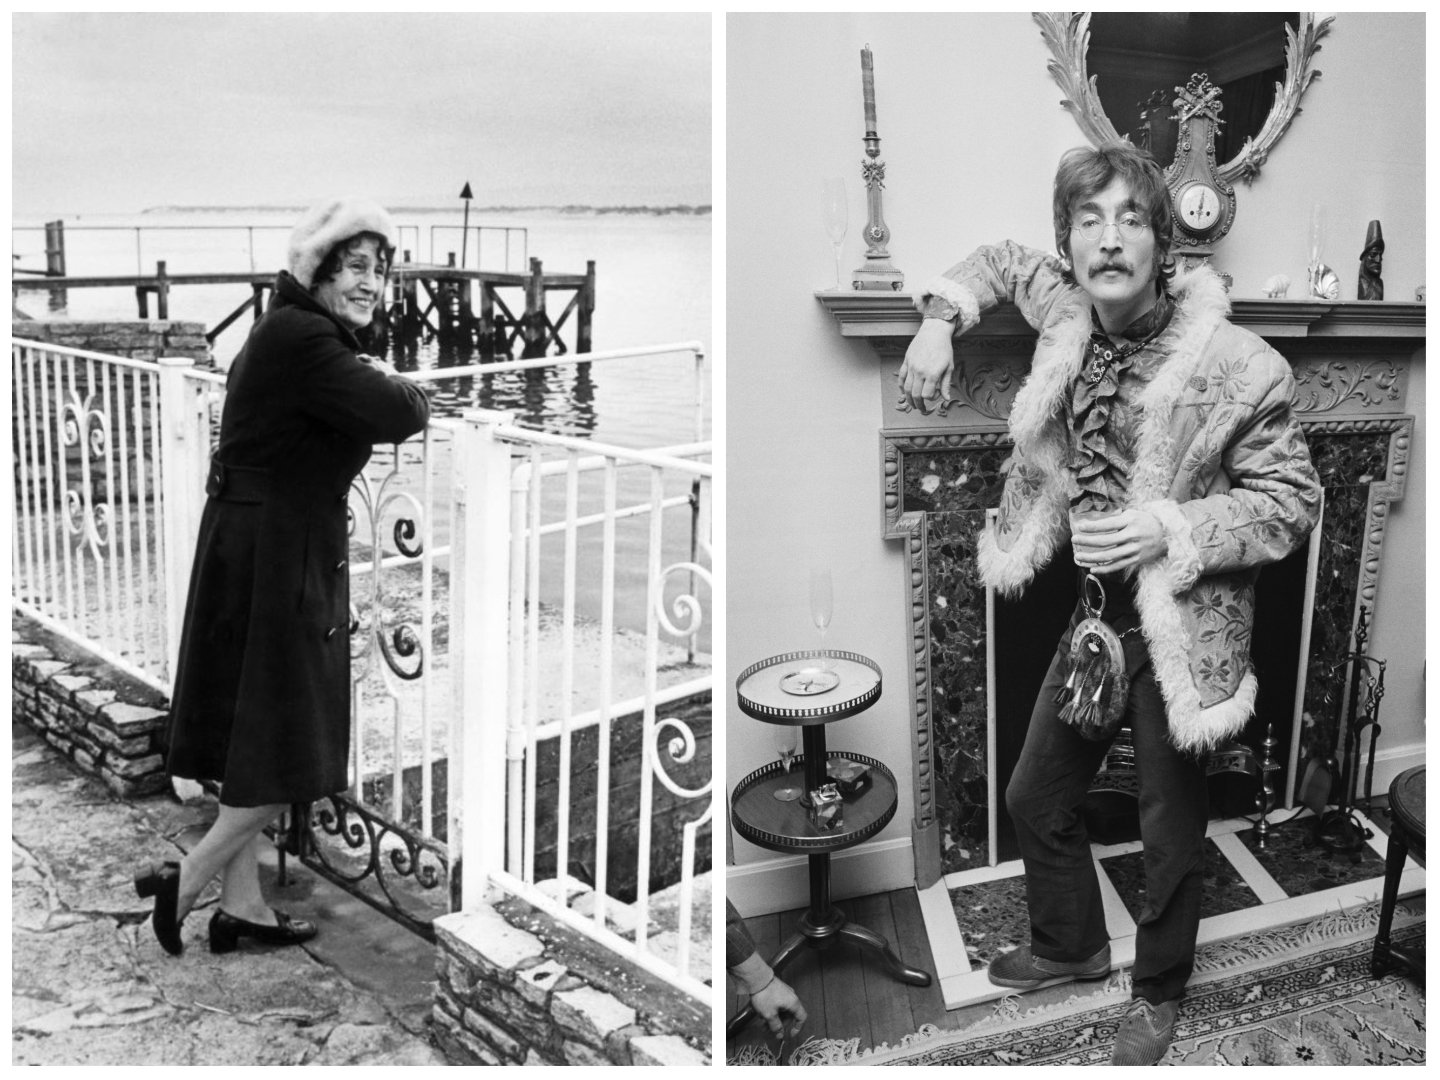 John Lennon's Aunt Mimi leans on a fence overlooking the water. John Lennon leans on a fireplace.